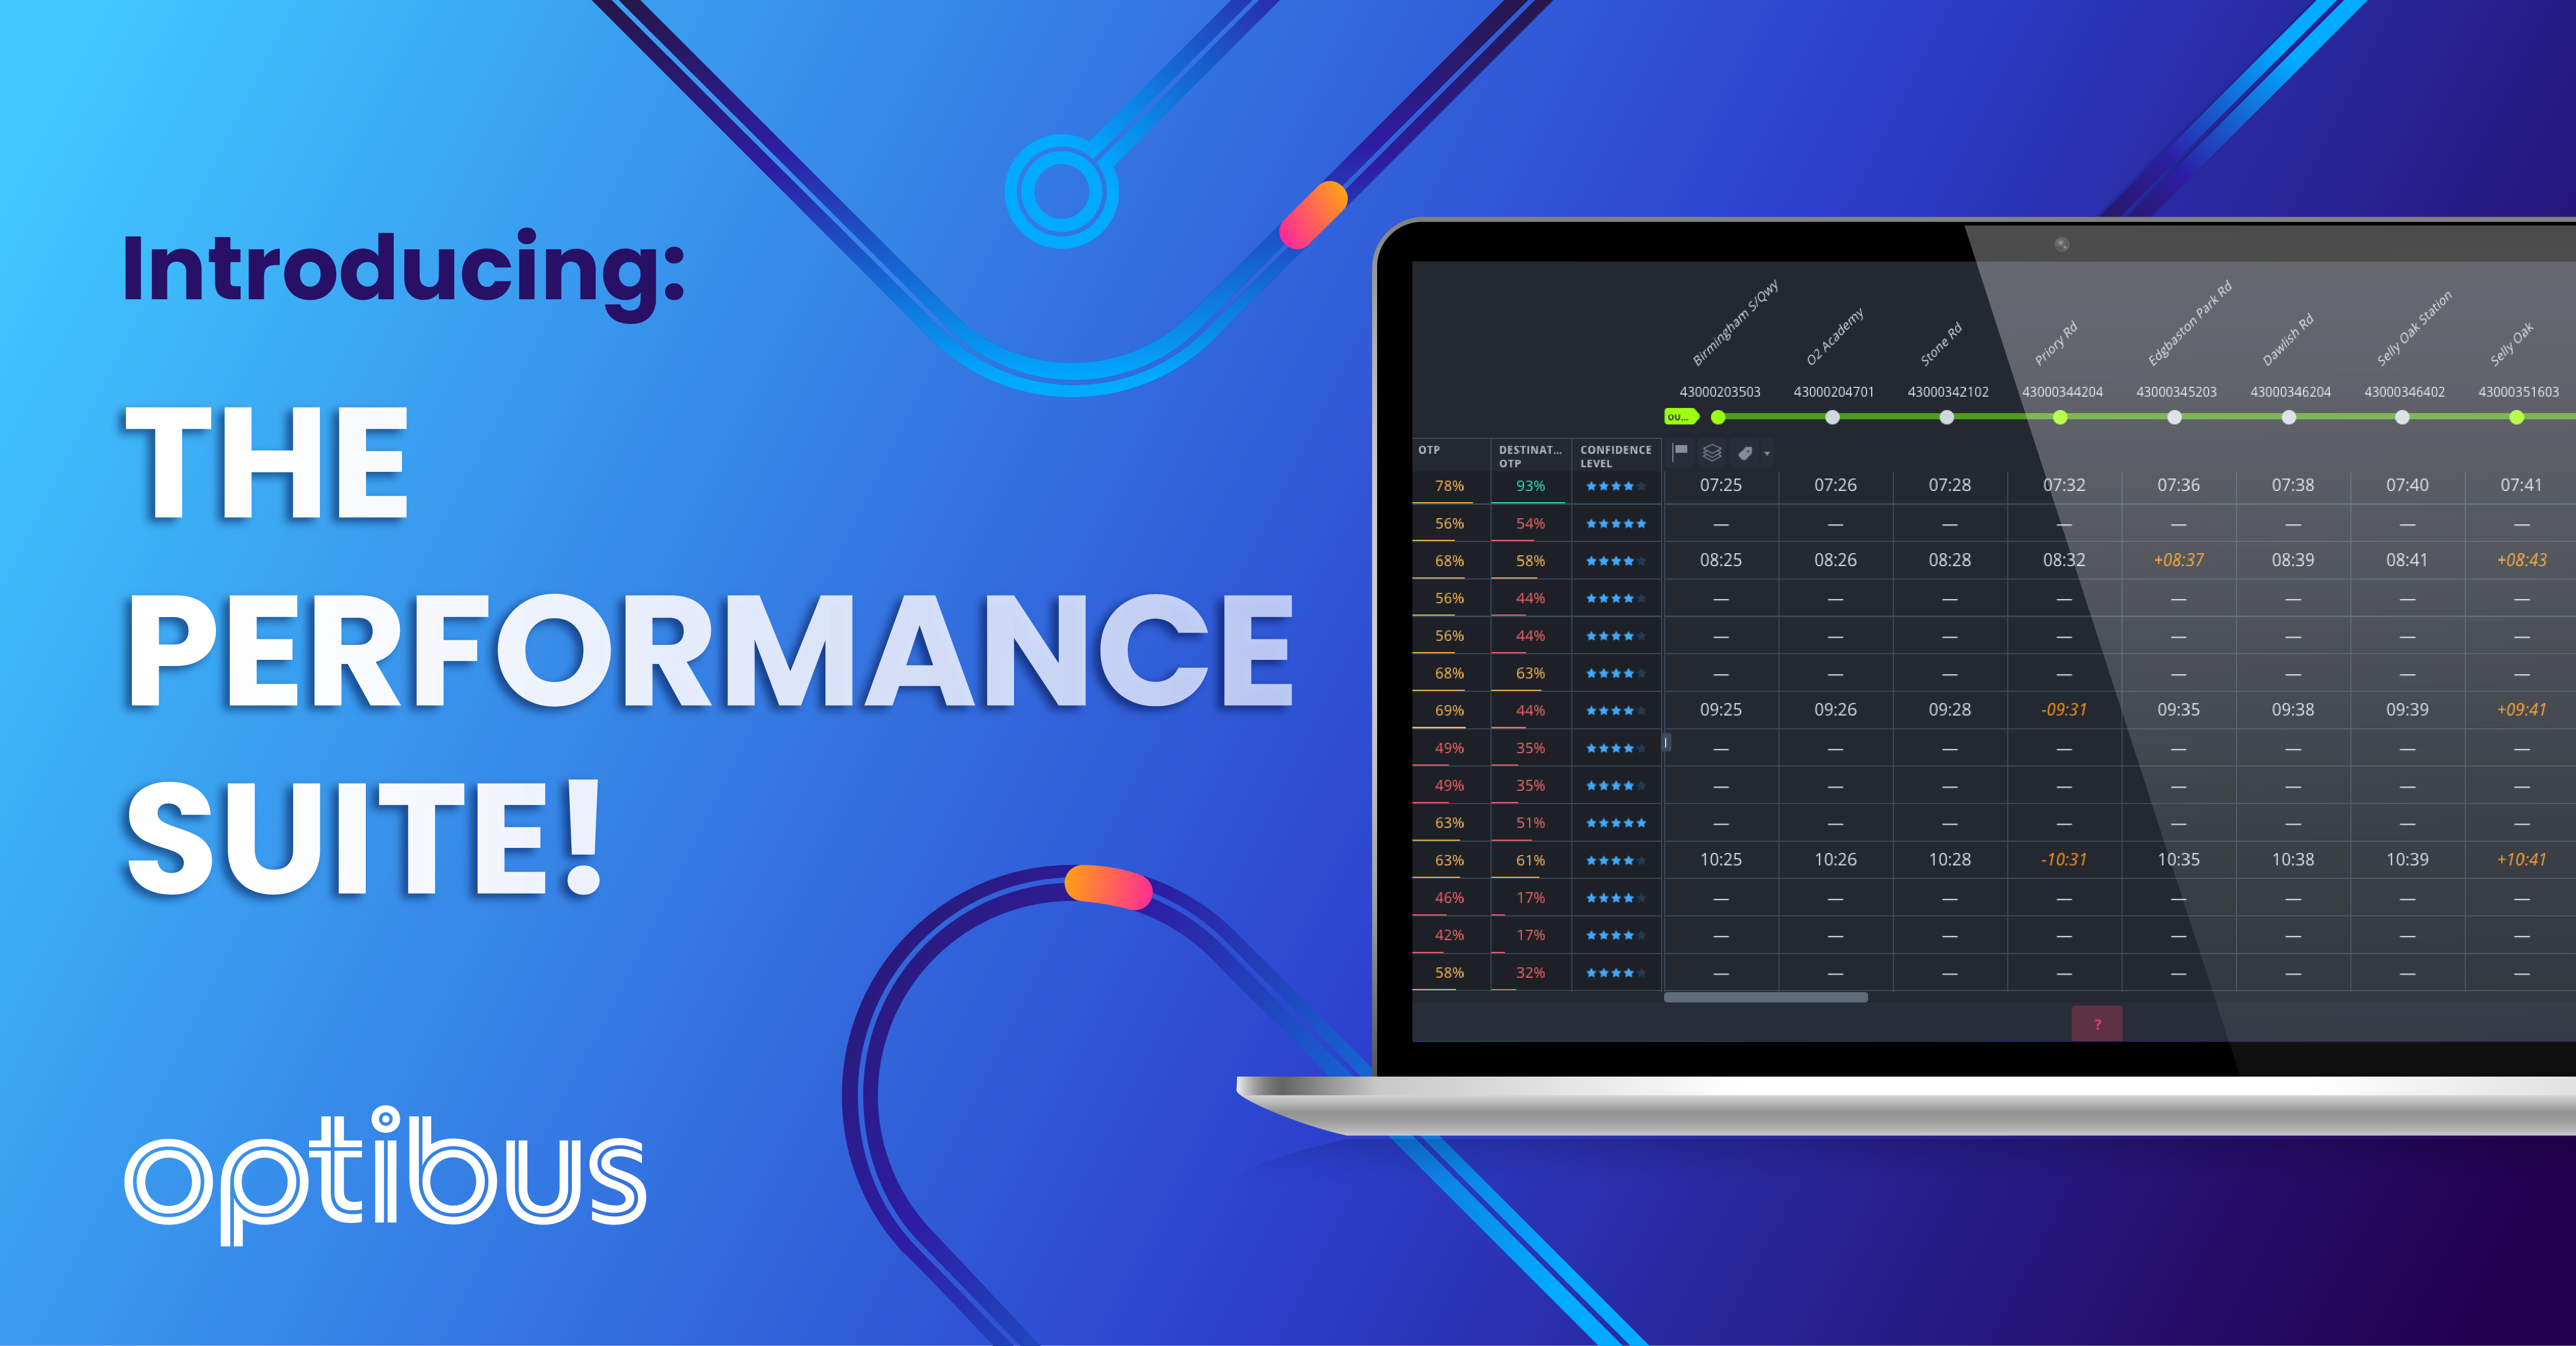 Introducing Optibus new Performance Suite, which allows planners and schedulers to easily predict, analyze, and improve their overall performance and provide a better overall passenger experience